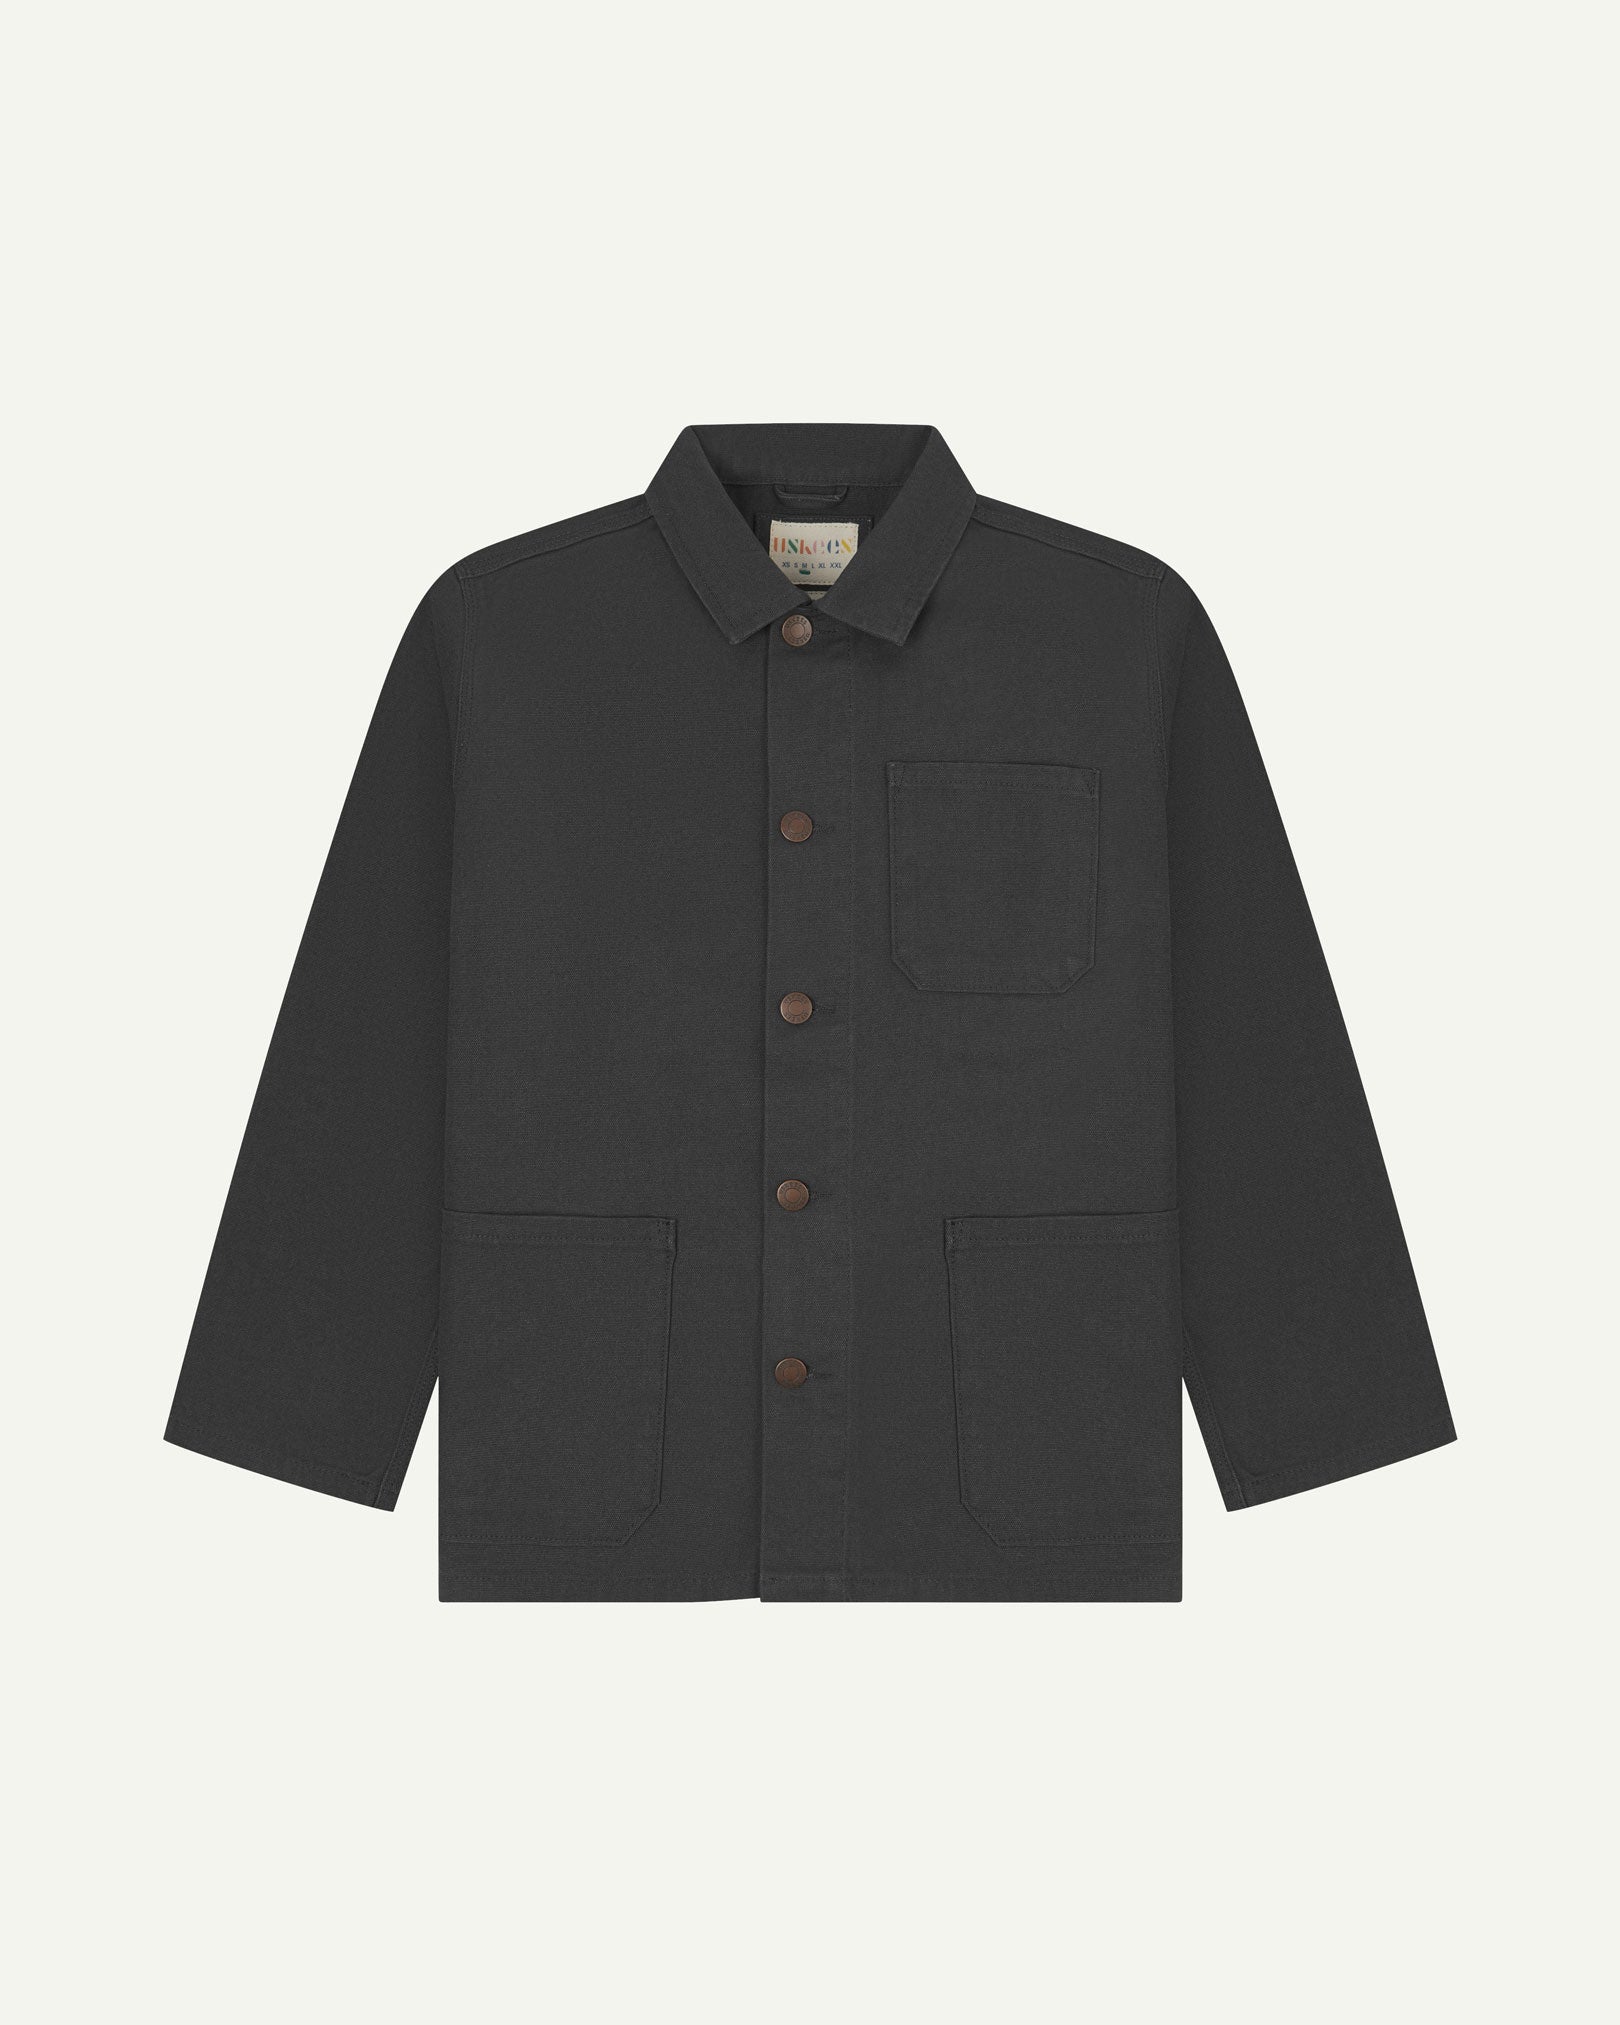 Front view of Uskees dark grey canvas men's overshirt presented buttoned up showing the 3 front pockets.